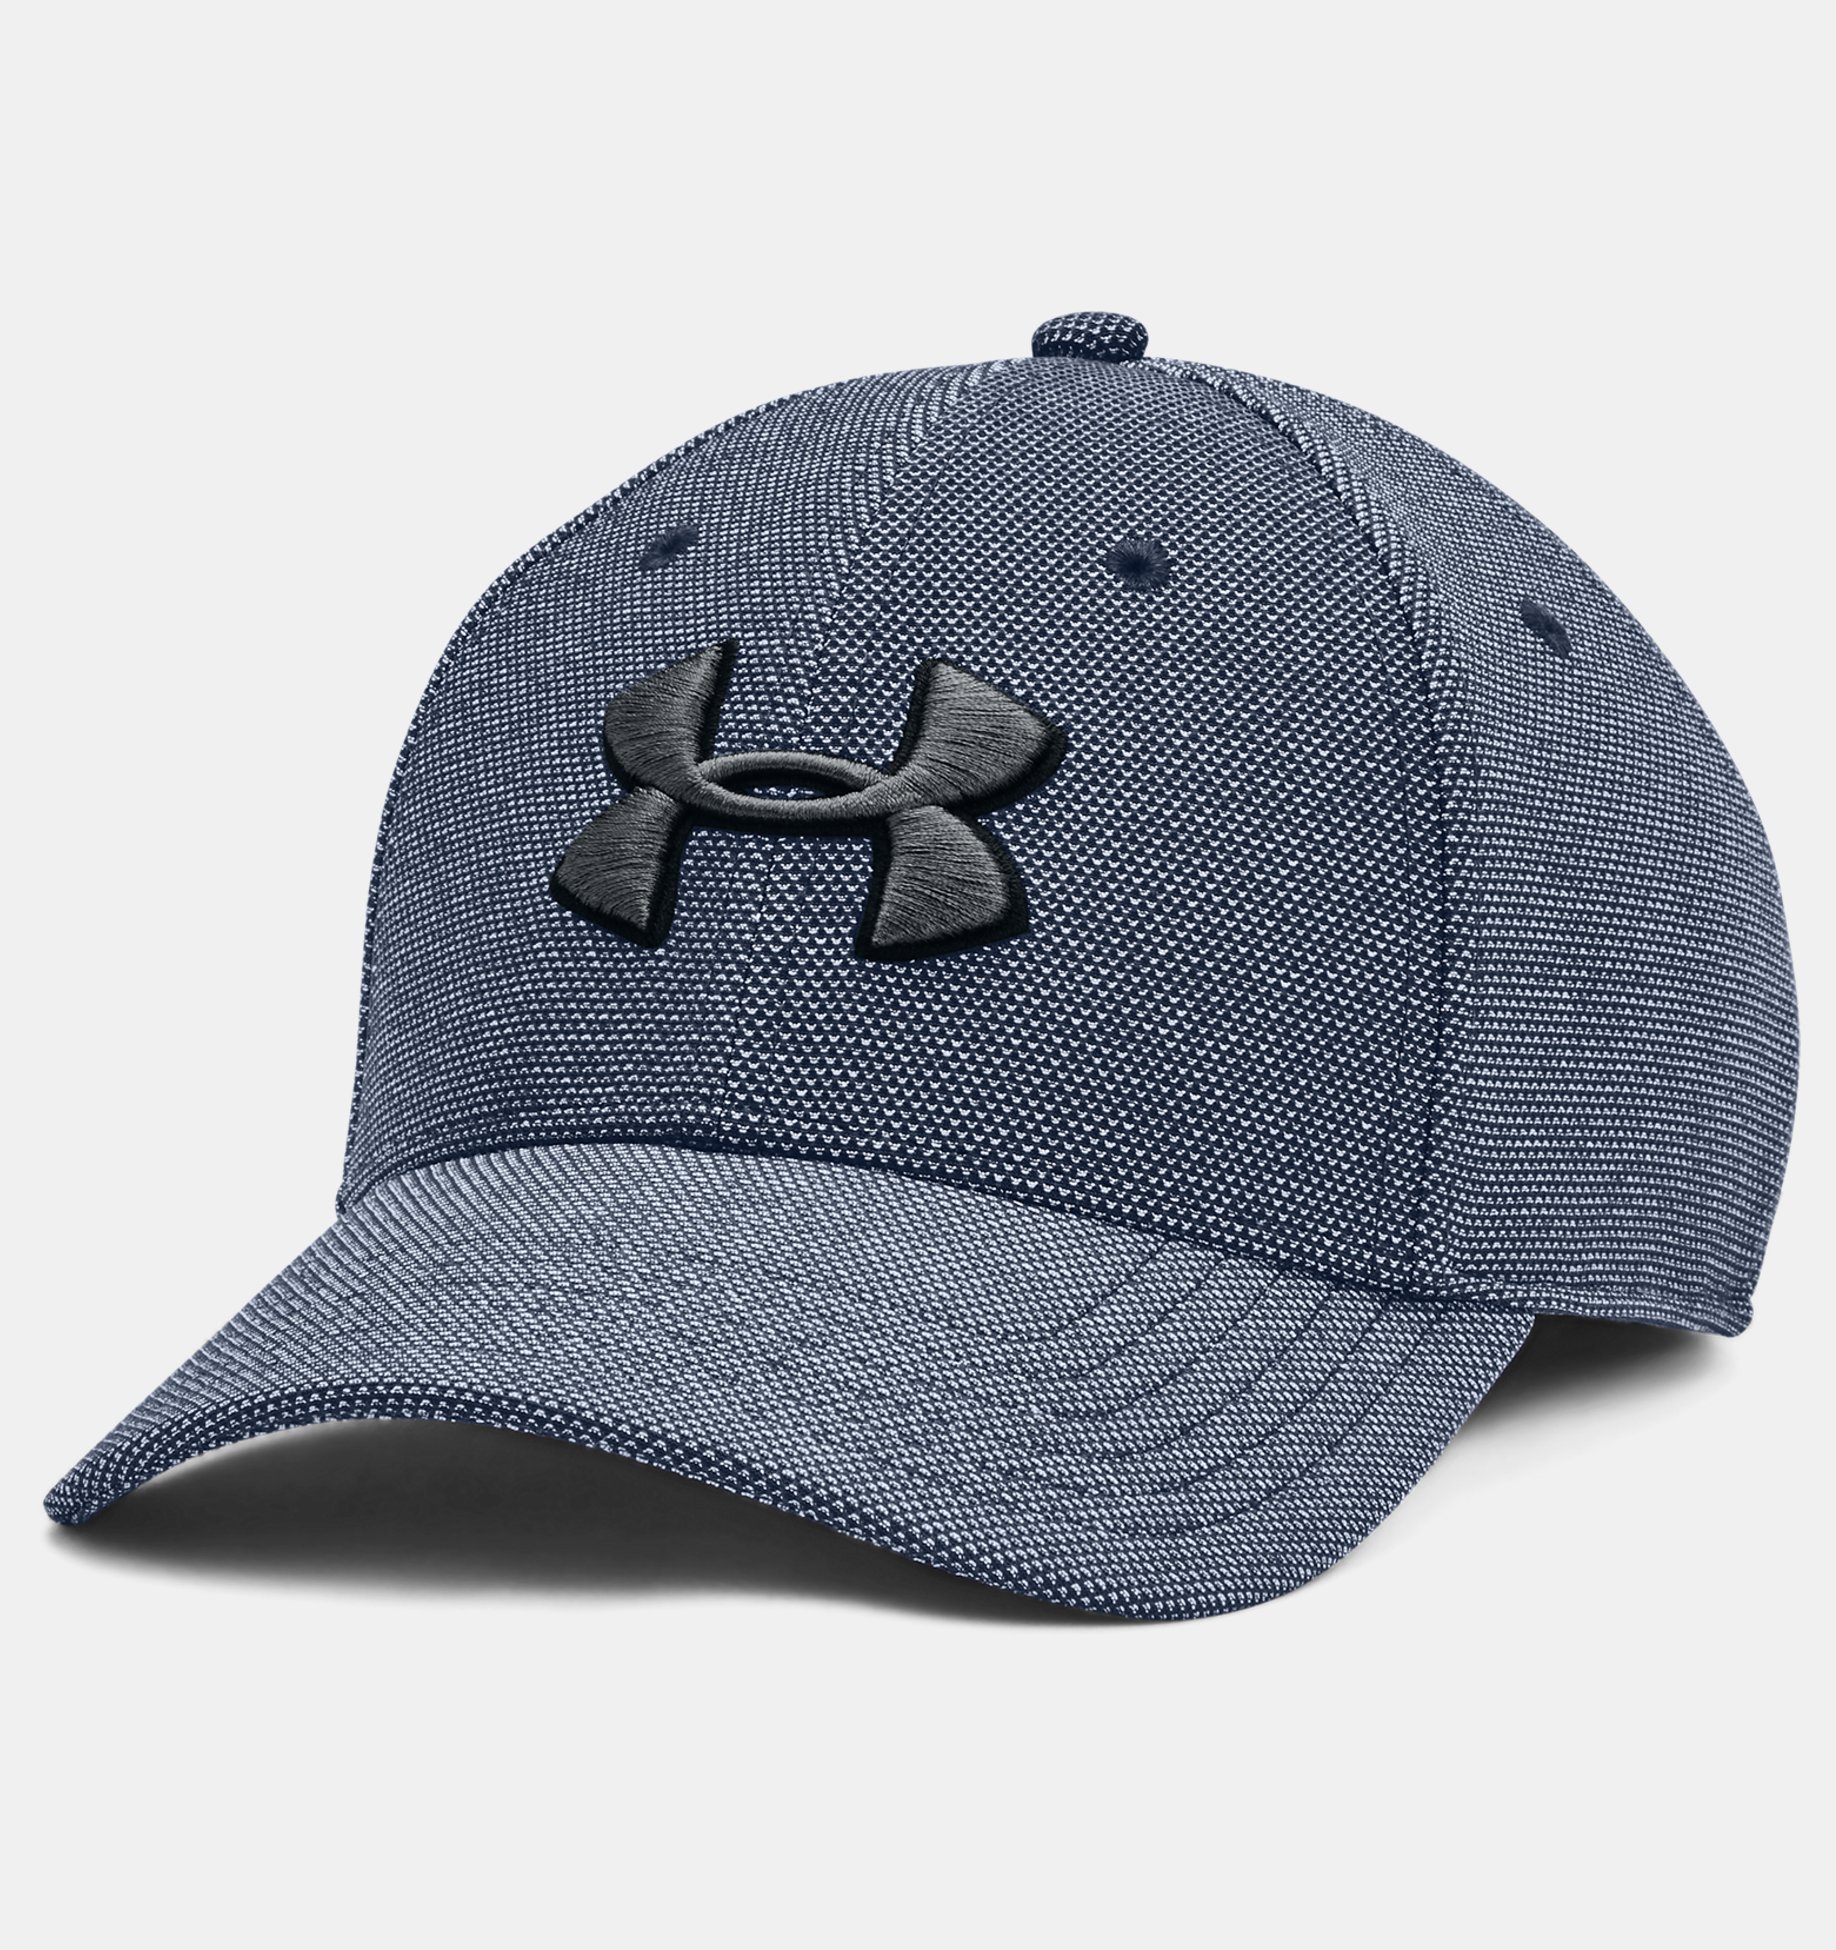 Under Armour Mens IL Graphic 3 Hats 